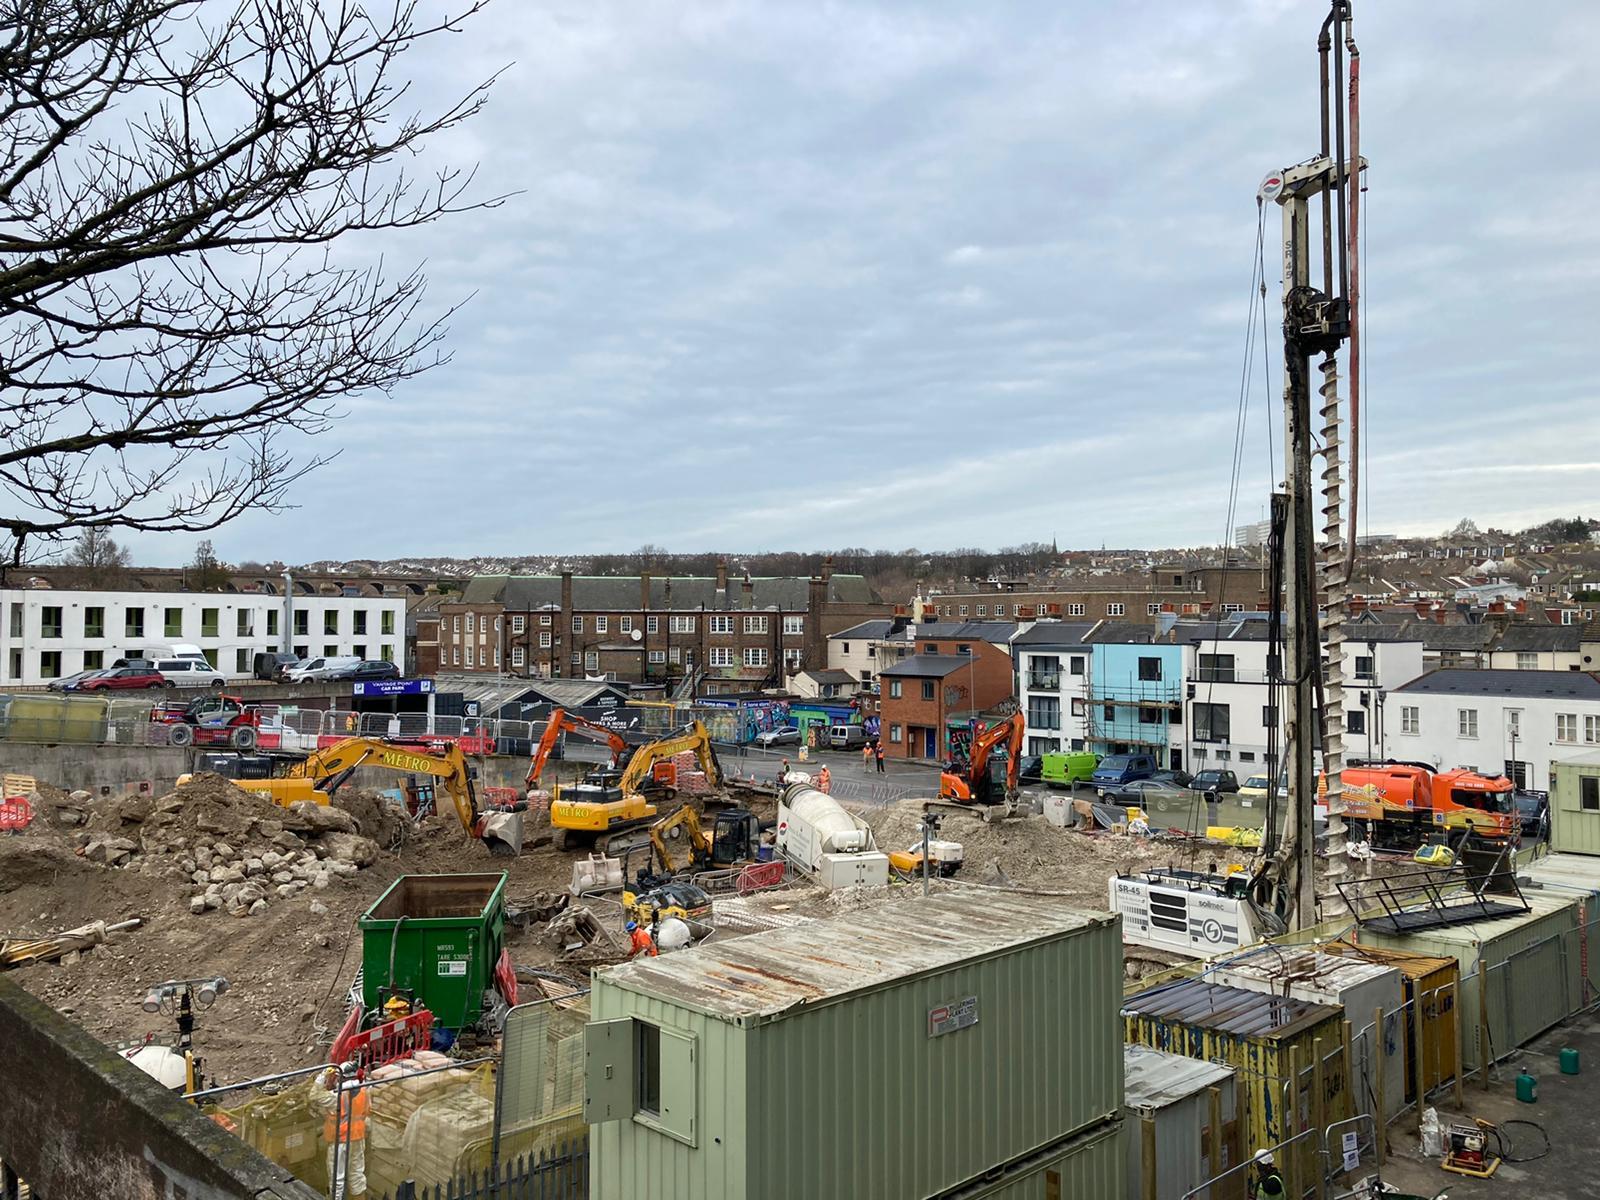 Pictures show the staggering transformation planned as part of the Longley Industrial Development in Brighton